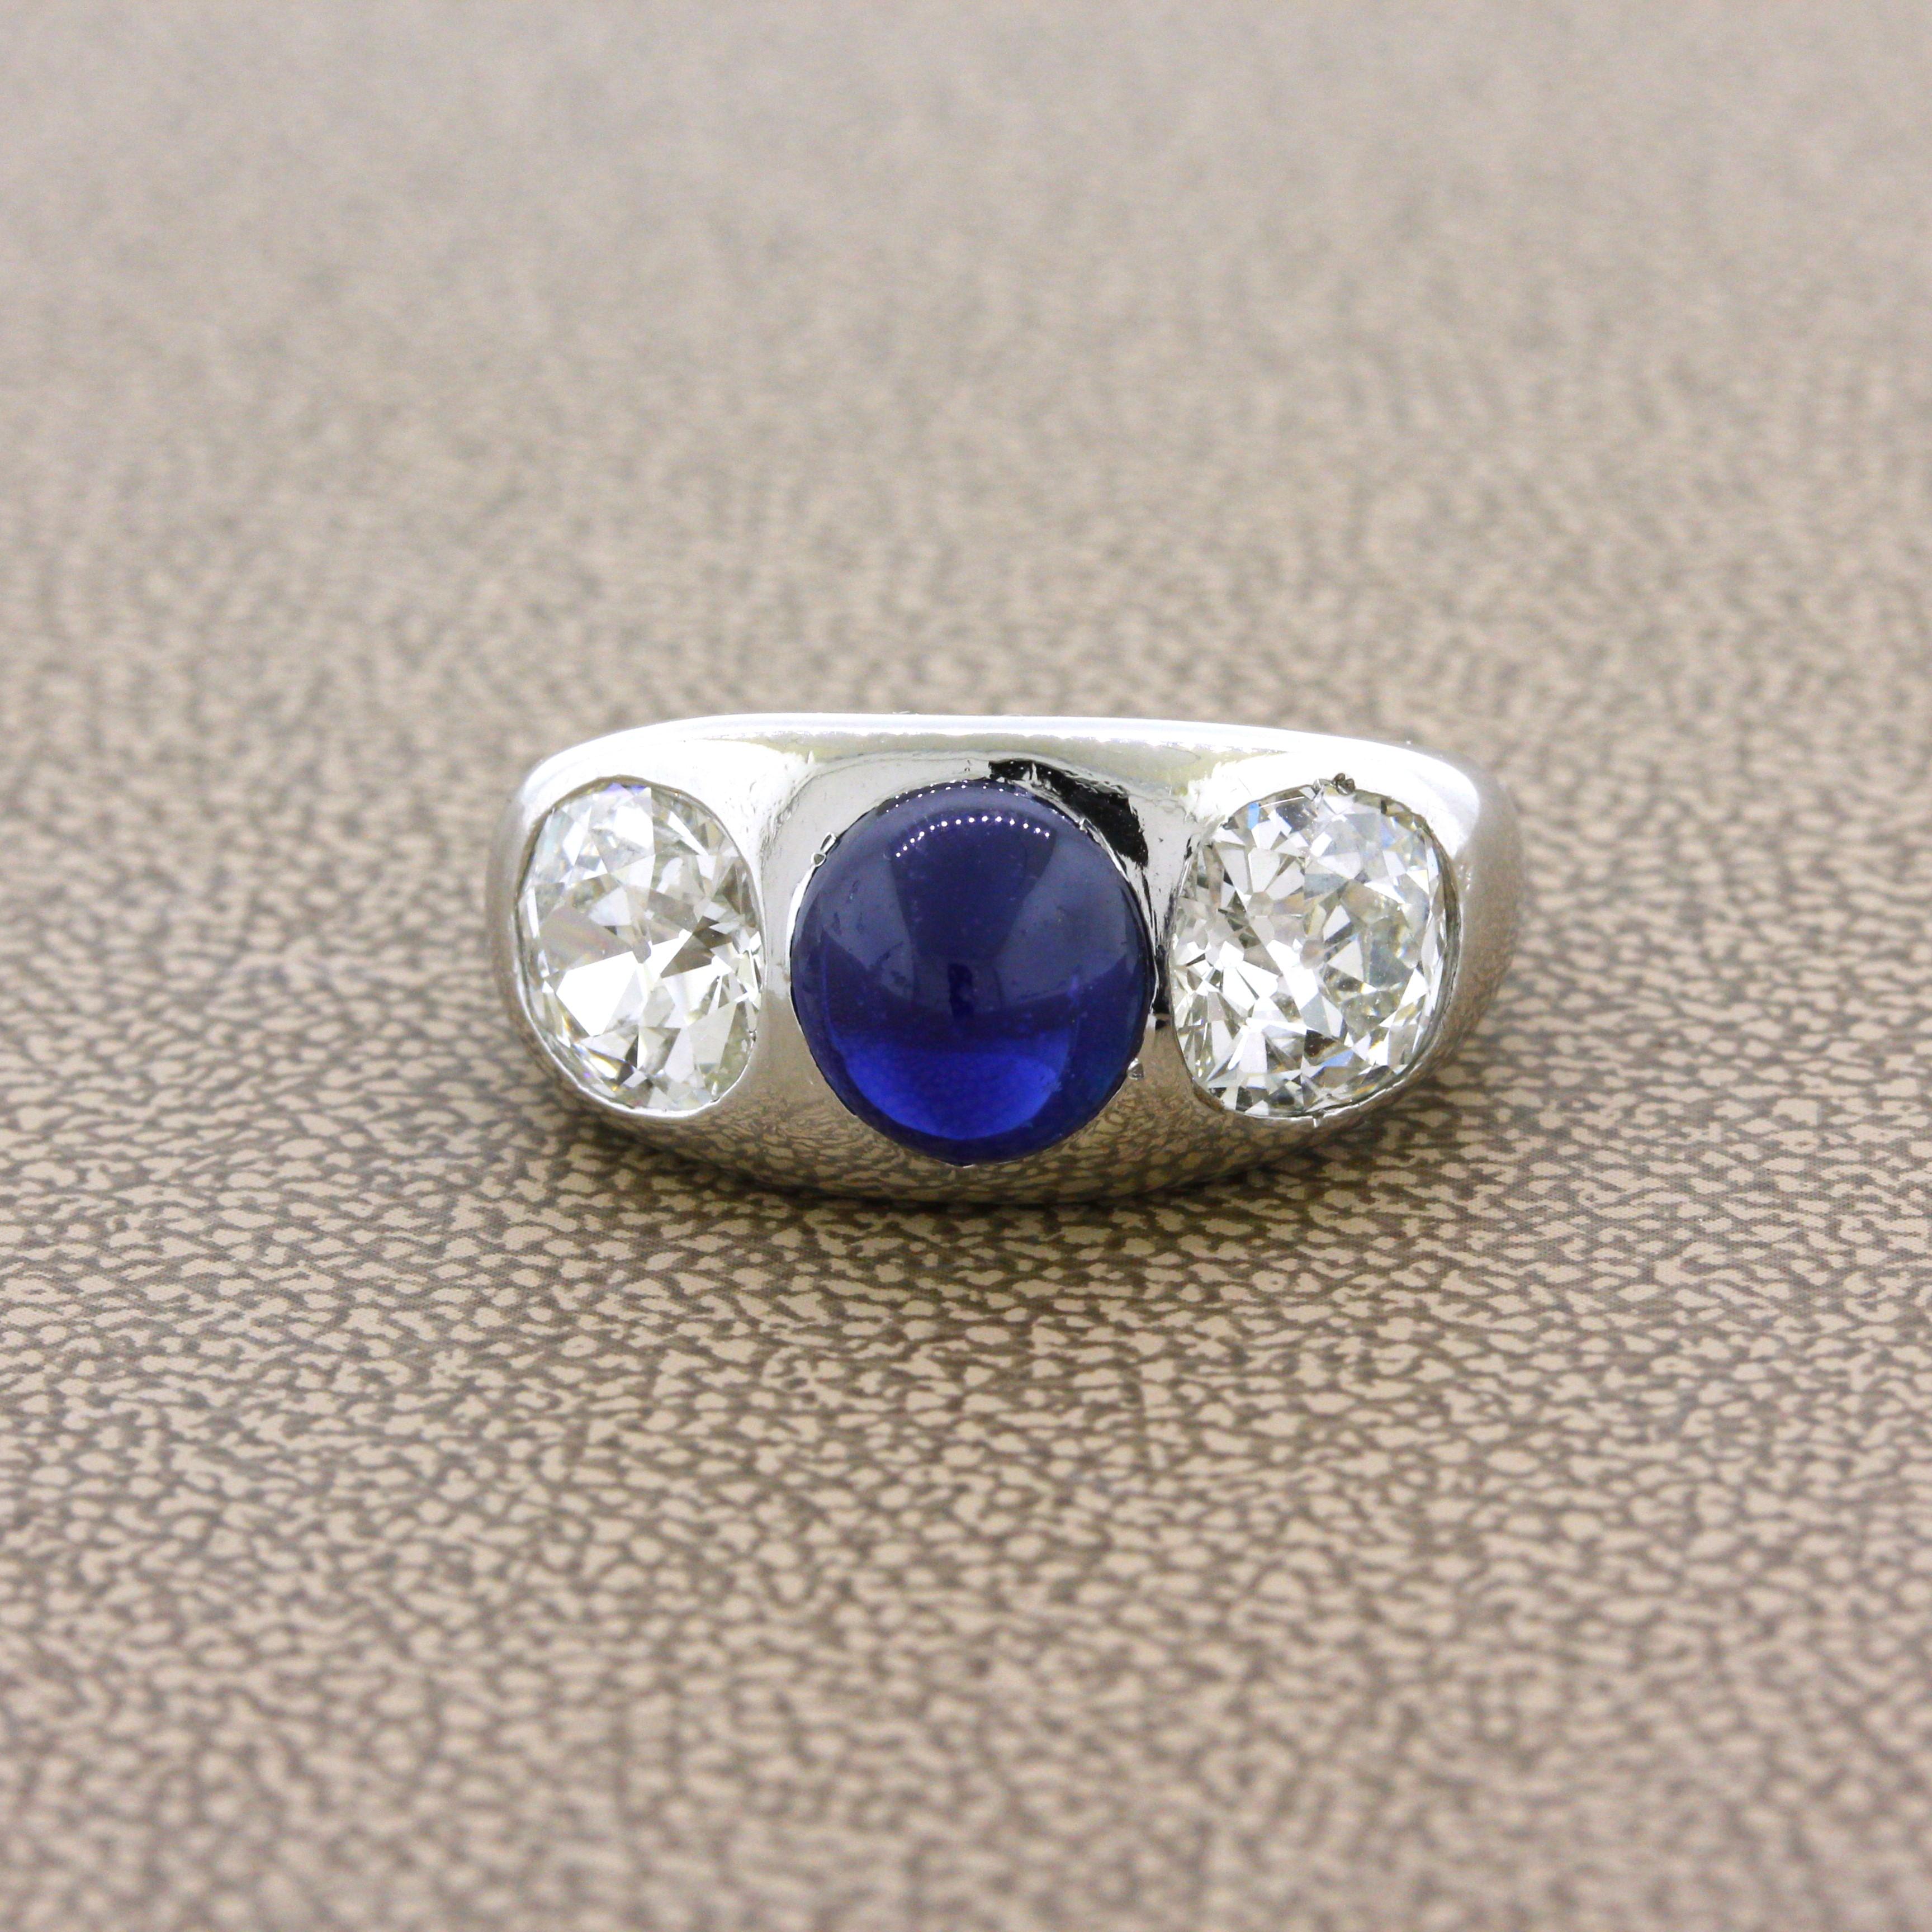 A lovely modern made ring designed in the antique style. It features a cabochon sapphire, certified by the AGL, in its center along with two large old European-cut diamonds set on its sides. The two diamonds are the real stars of the show as they